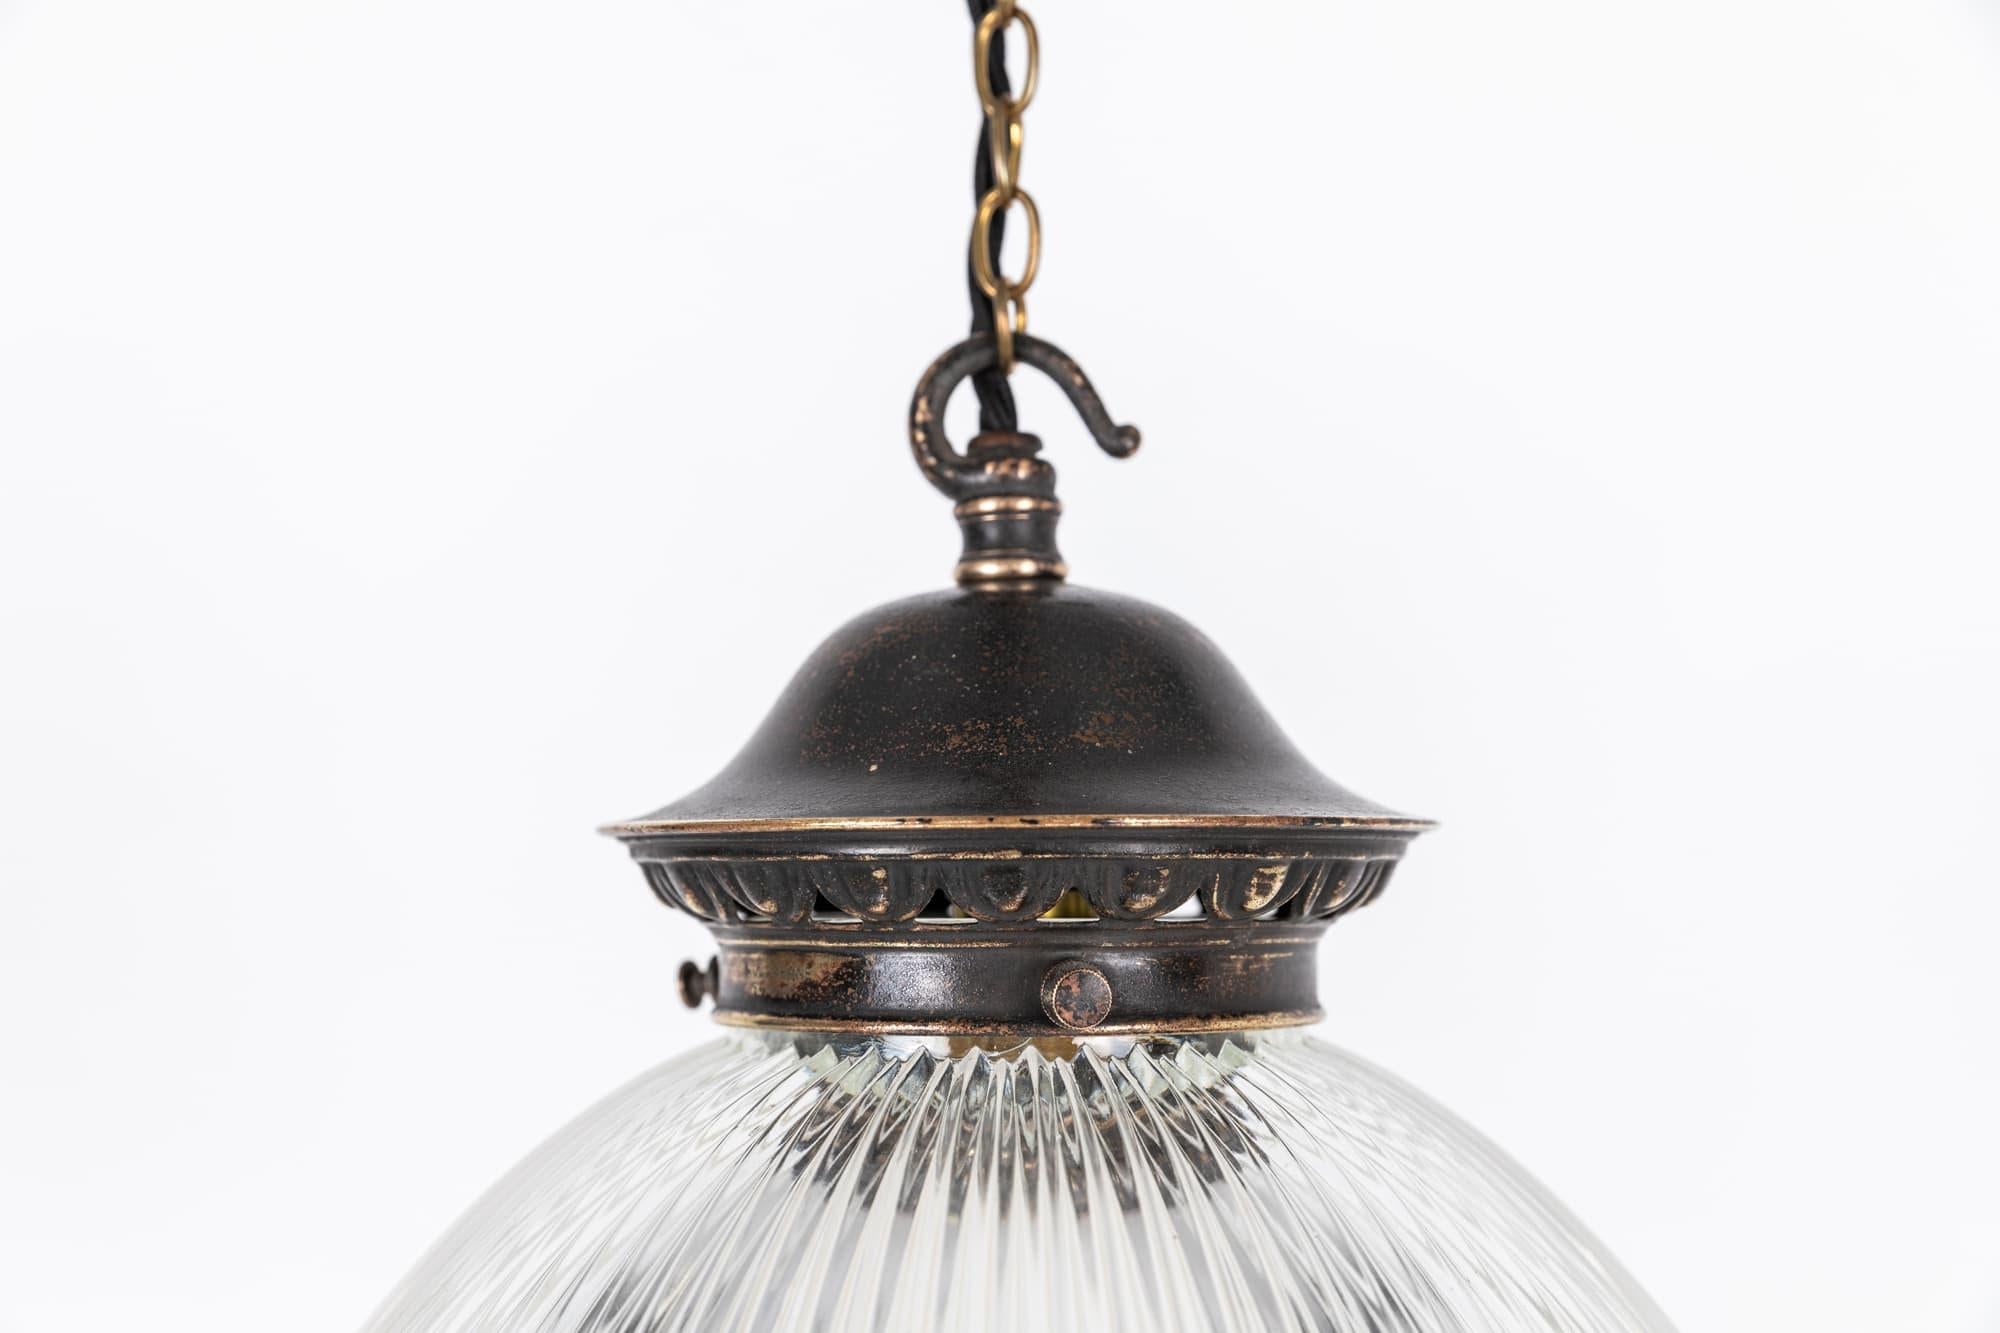 

Beautiful 'Reflector-Refractor' pendant light made in England by Holophane. c.1920.

Two-part prismatic glass reflector supported by original aged brass gallery bearing the Holophane stamp. Glass parts also stamped Holophane.

Rewired with 1m